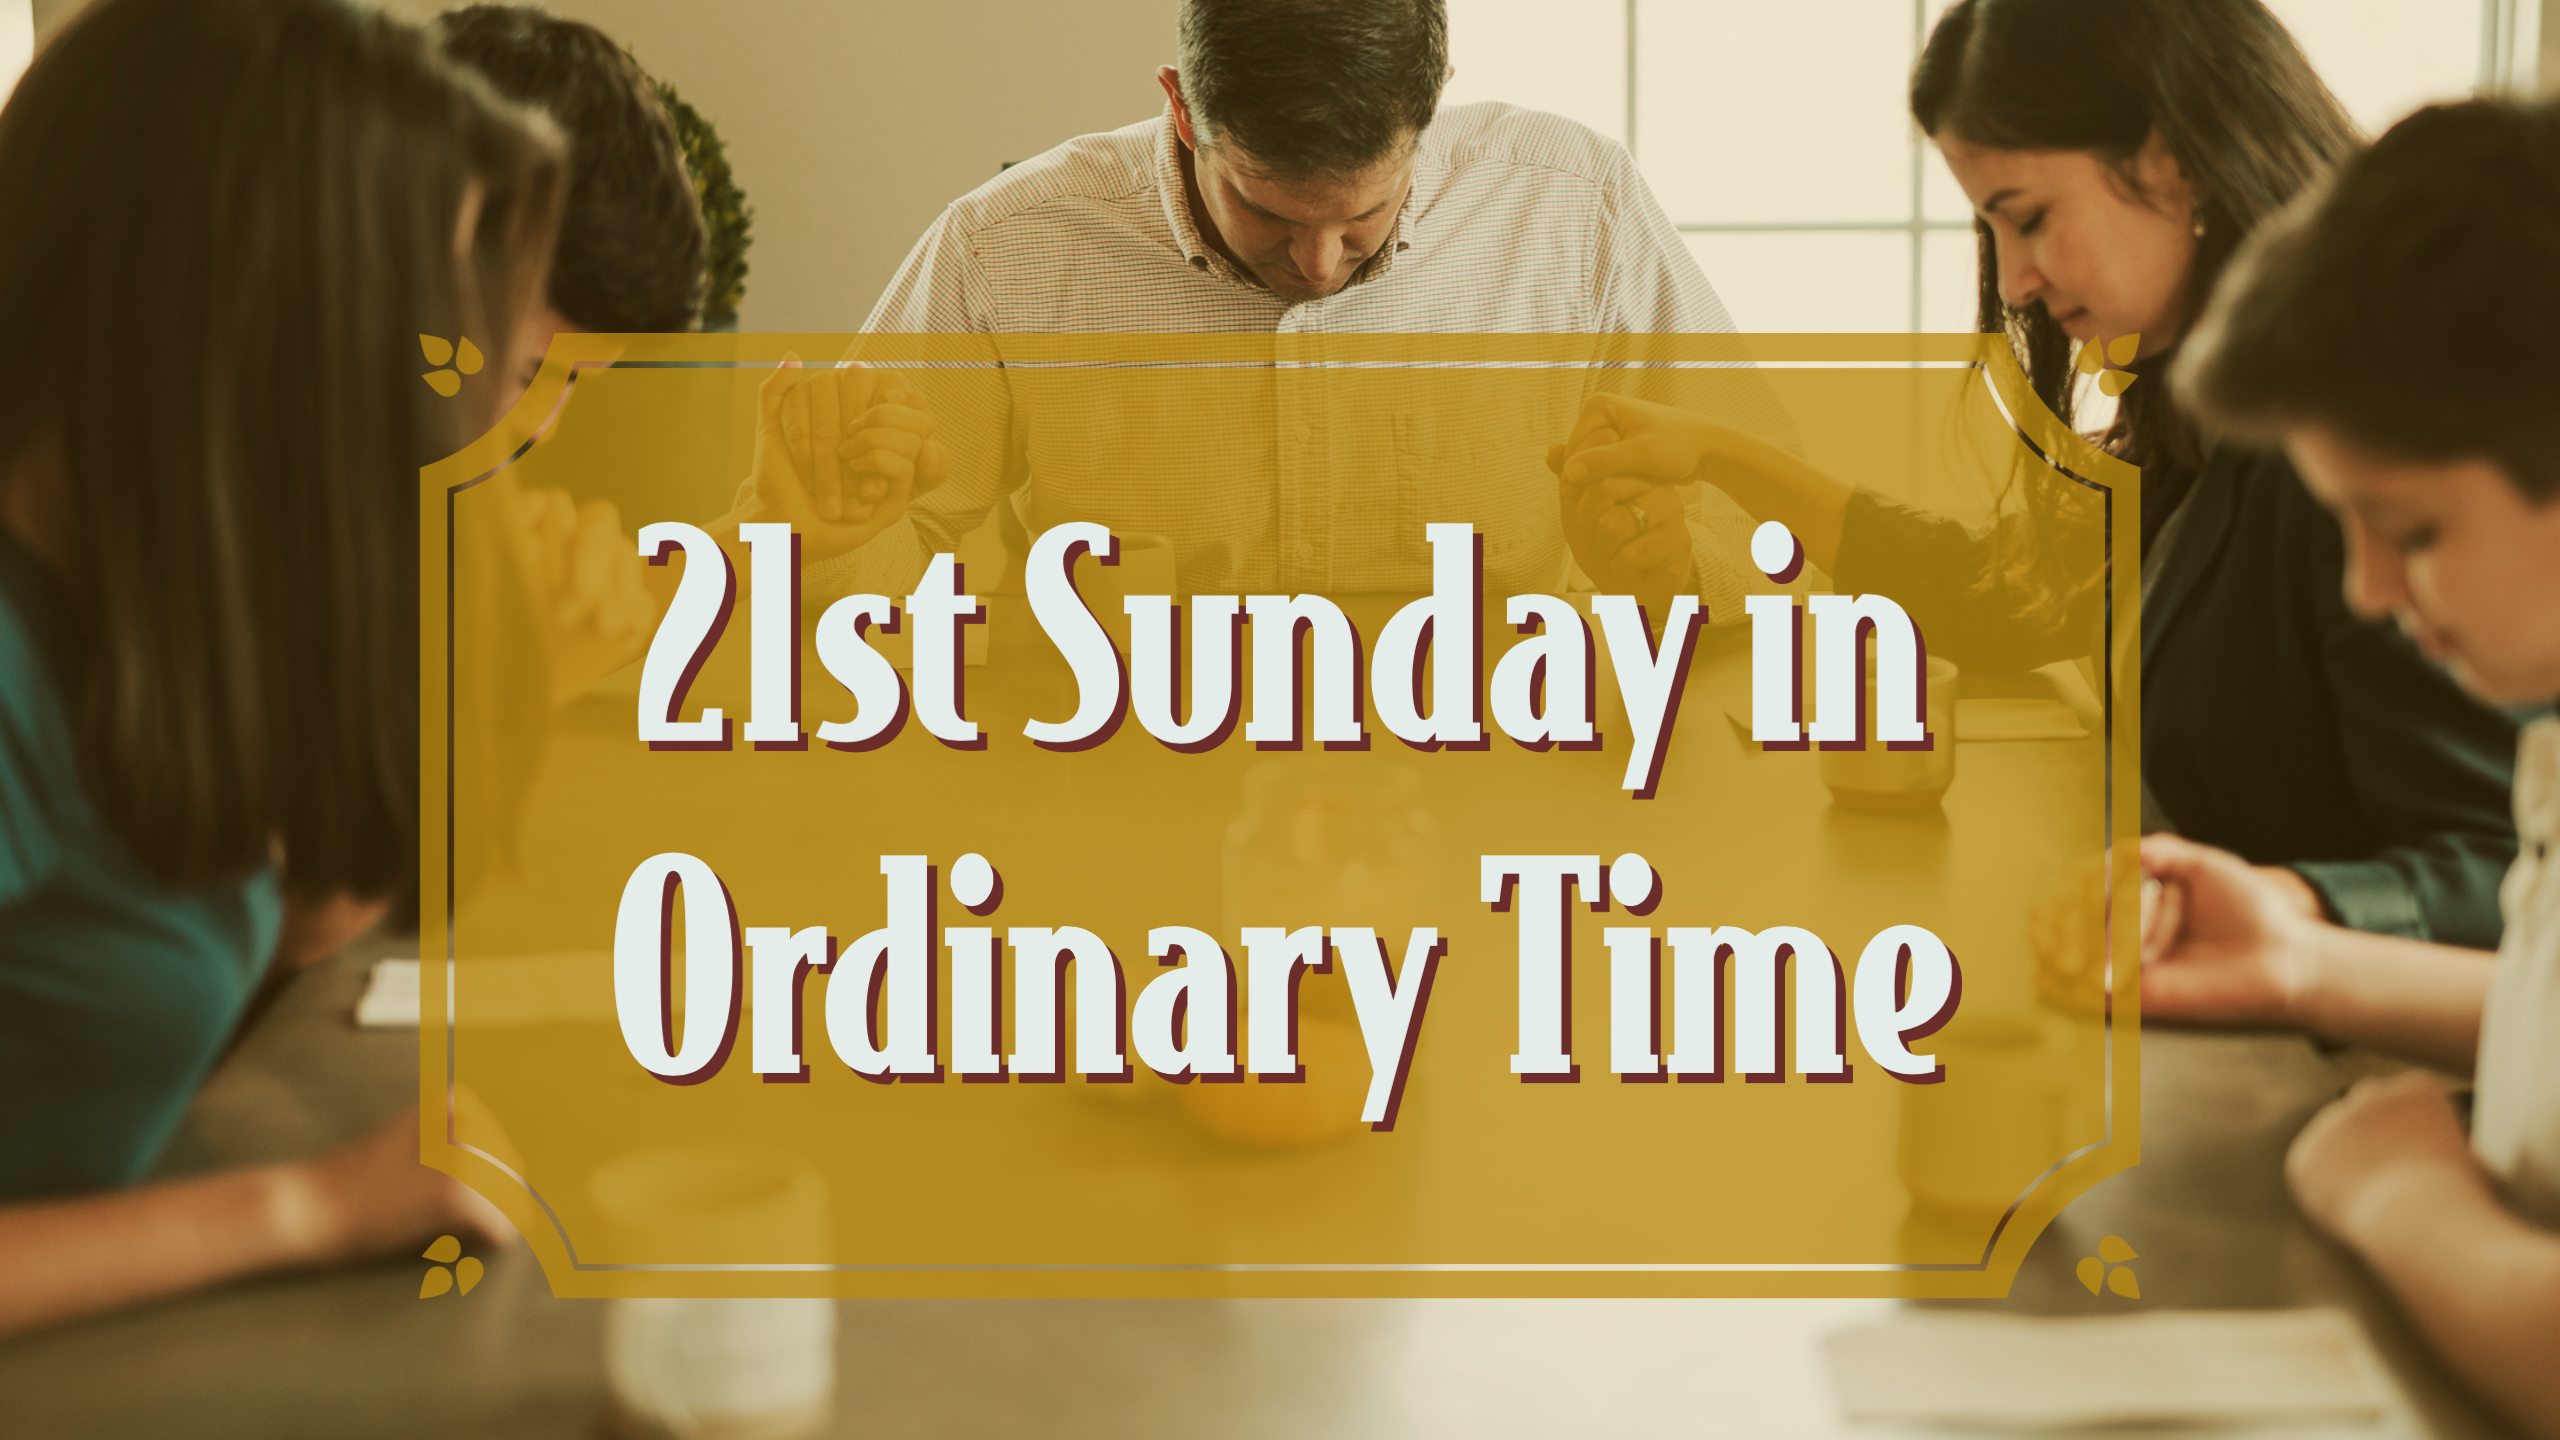 21st Sunday in Ordinary Time